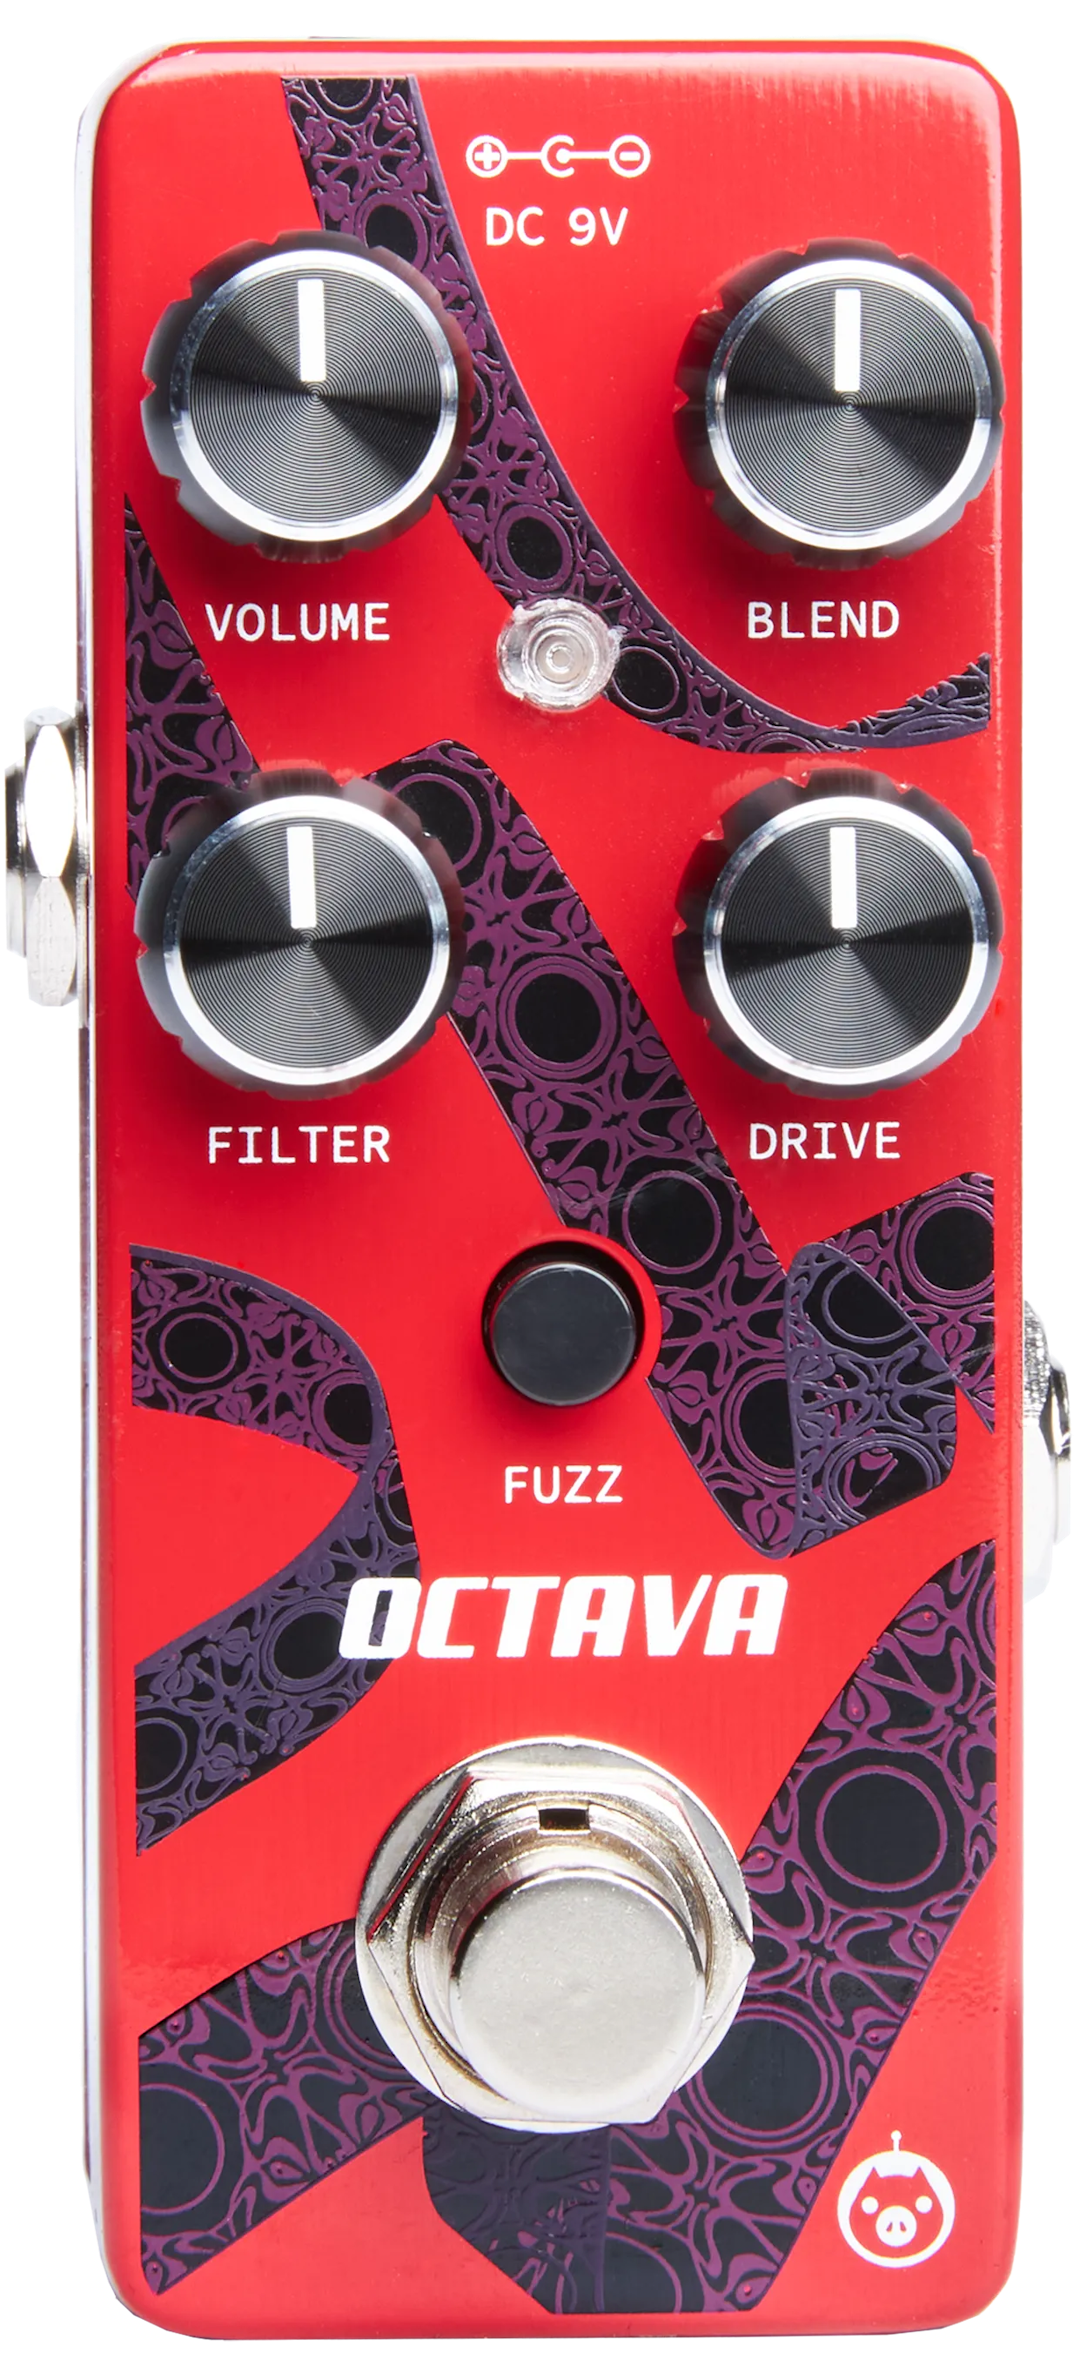 Octava Guitar Pedal By Pigtronix